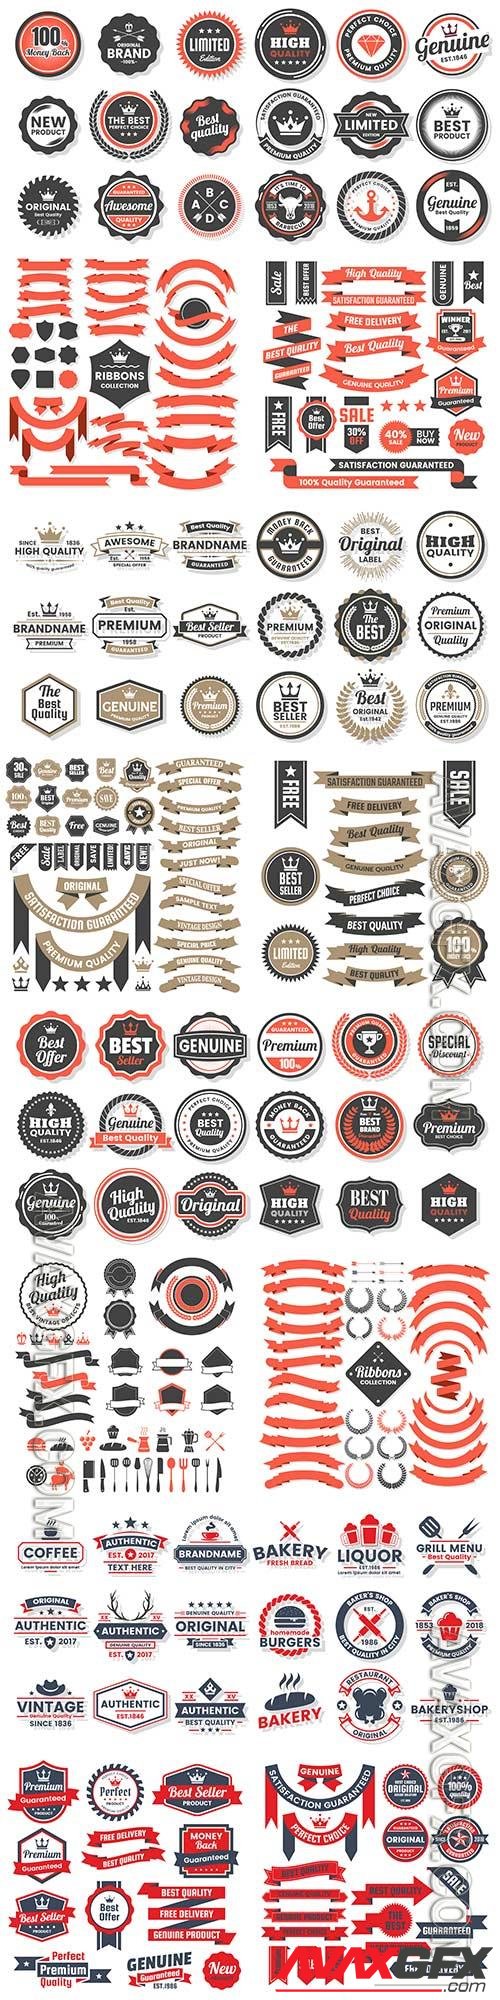 Vintage ribbons labels stickers and logos in vector